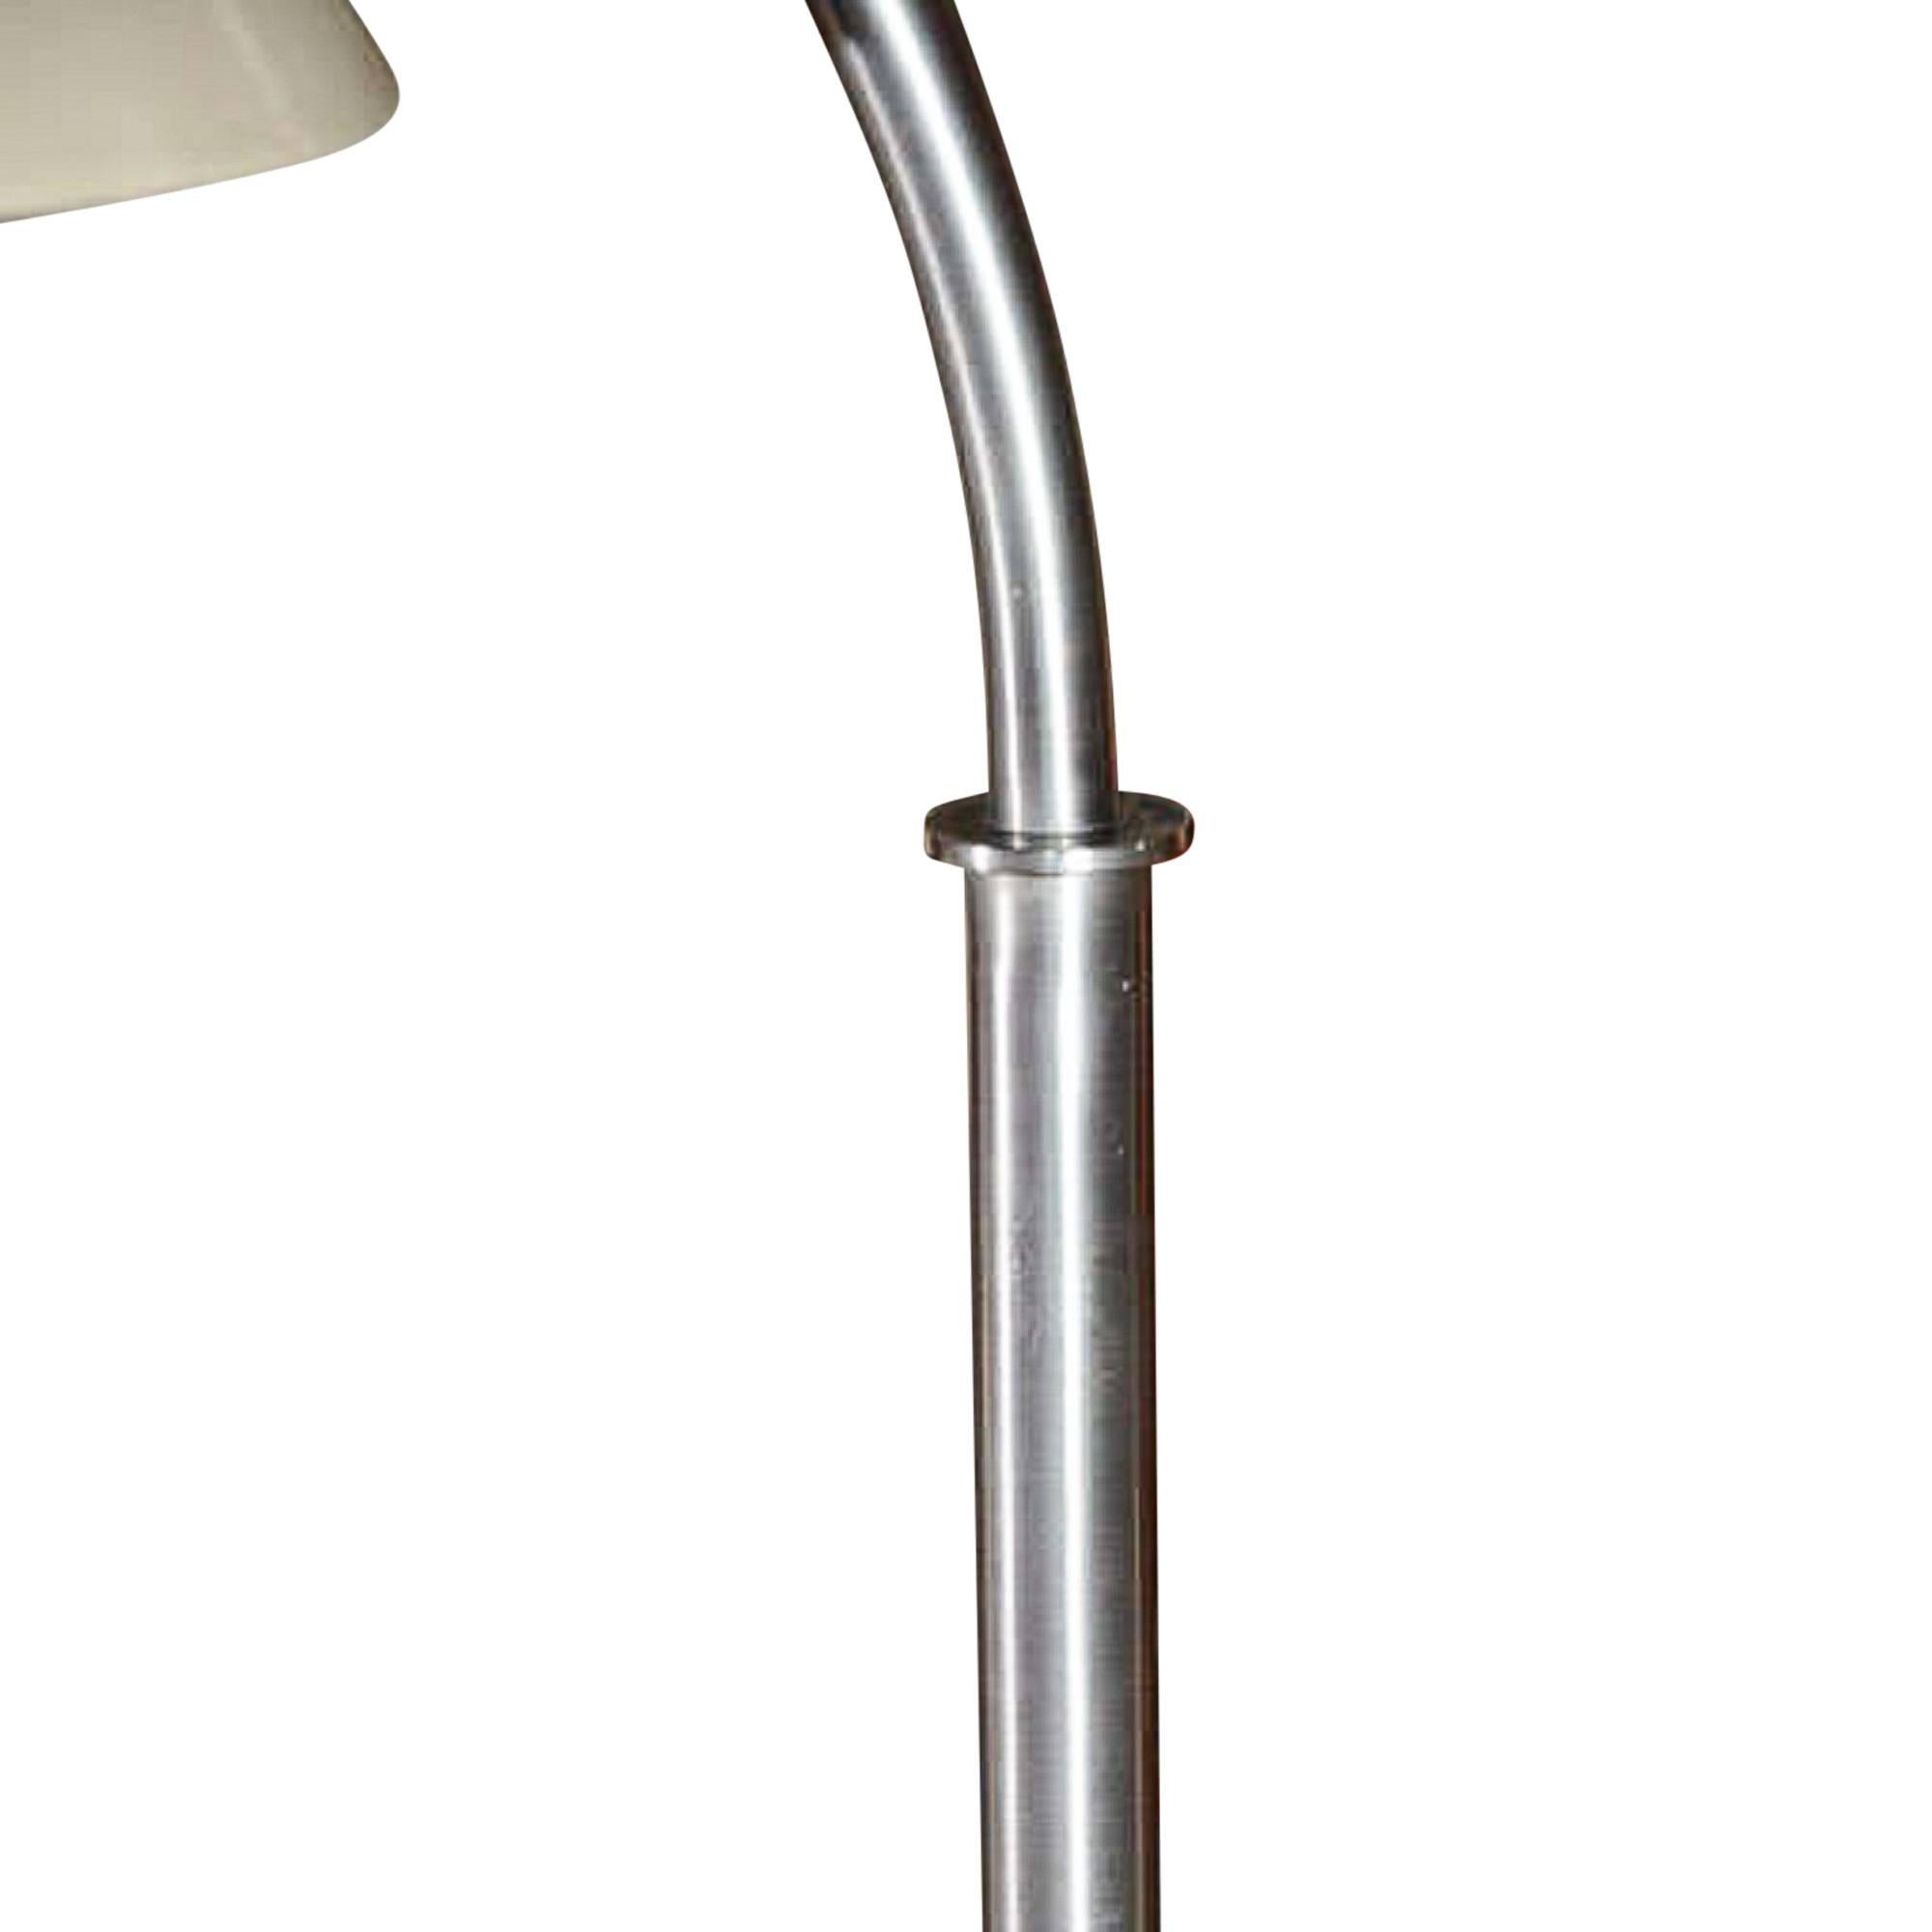 Aluminum Rare Standing Lamp by Walter Von Nessen, American, 1940s For Sale